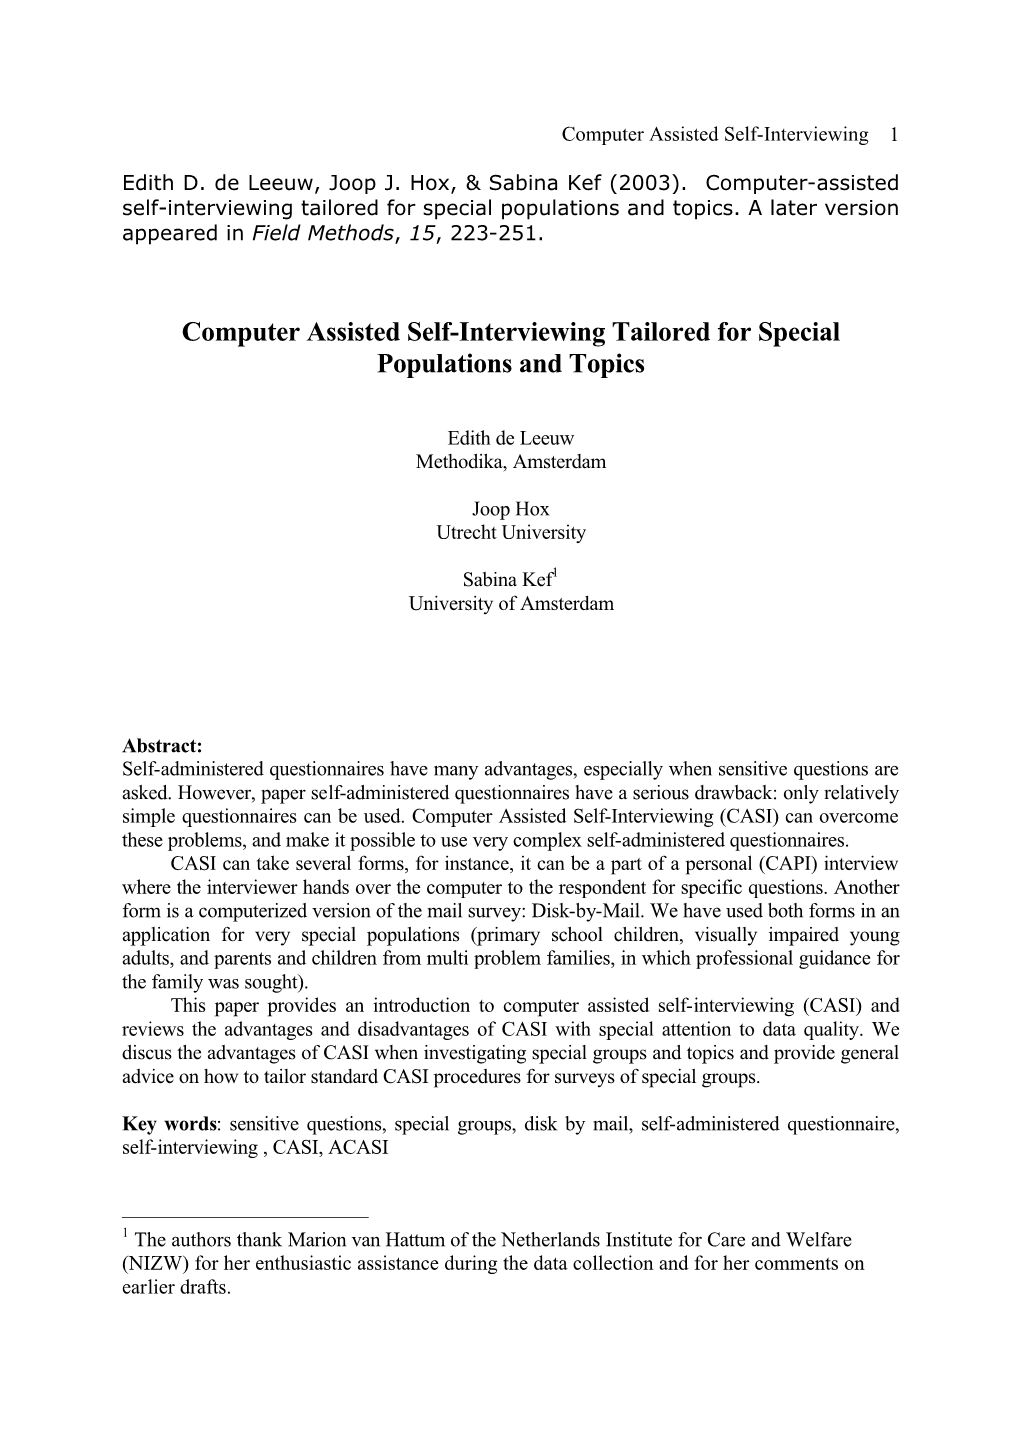 Computer Assisted Self-Interviewing Tailored for Special Populations and Topics